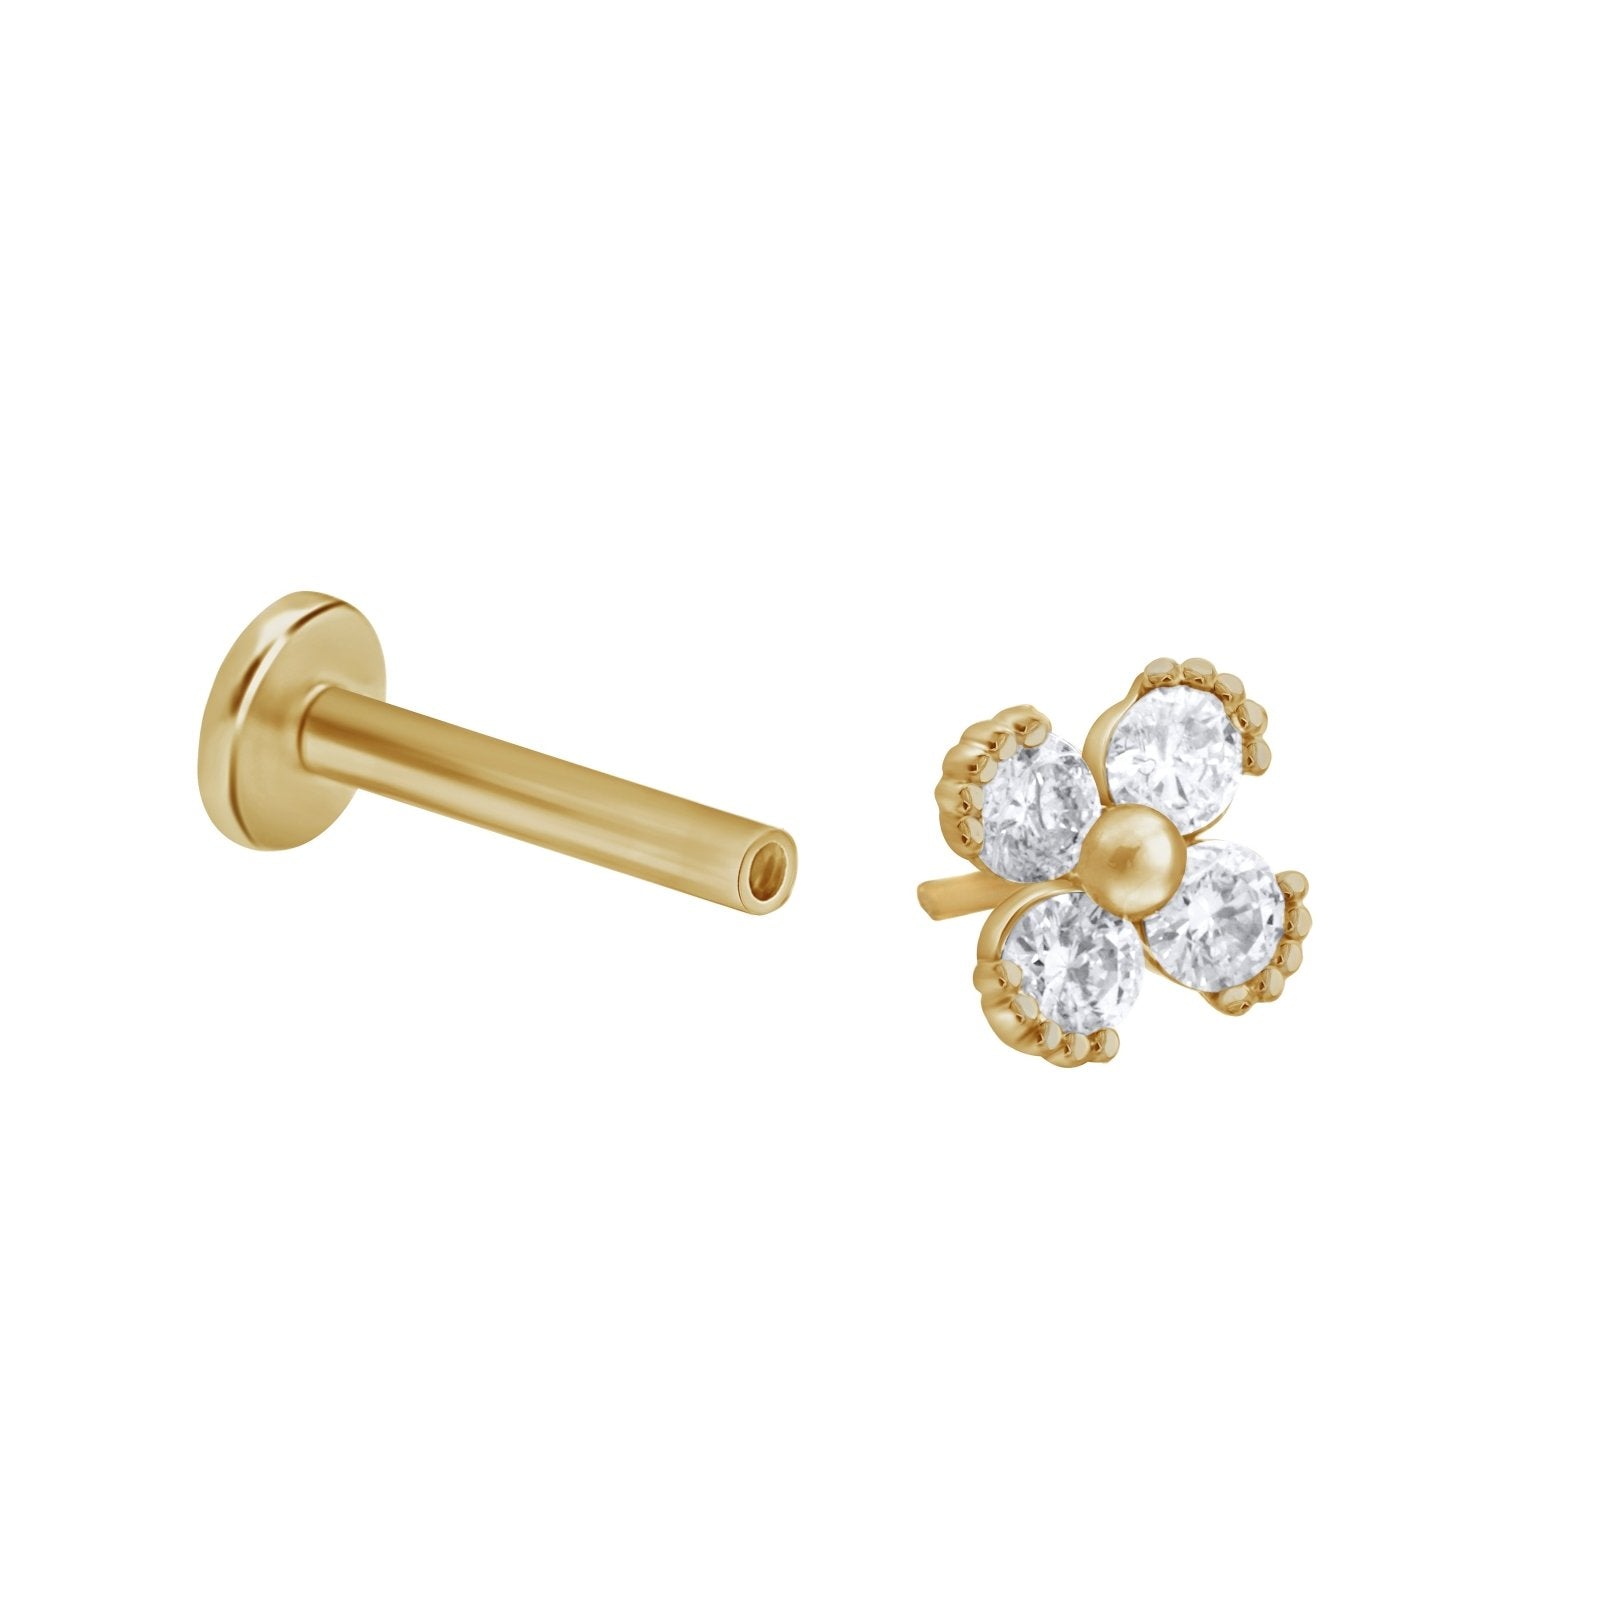 Beaded Diamond Four Petal Flower Flat Back Stud Earrings Estella Collection #product_description# 18382 14k Birthstone Cartilage Earring #tag4# #tag5# #tag6# #tag7# #tag8# #tag9# #tag10# 5MM